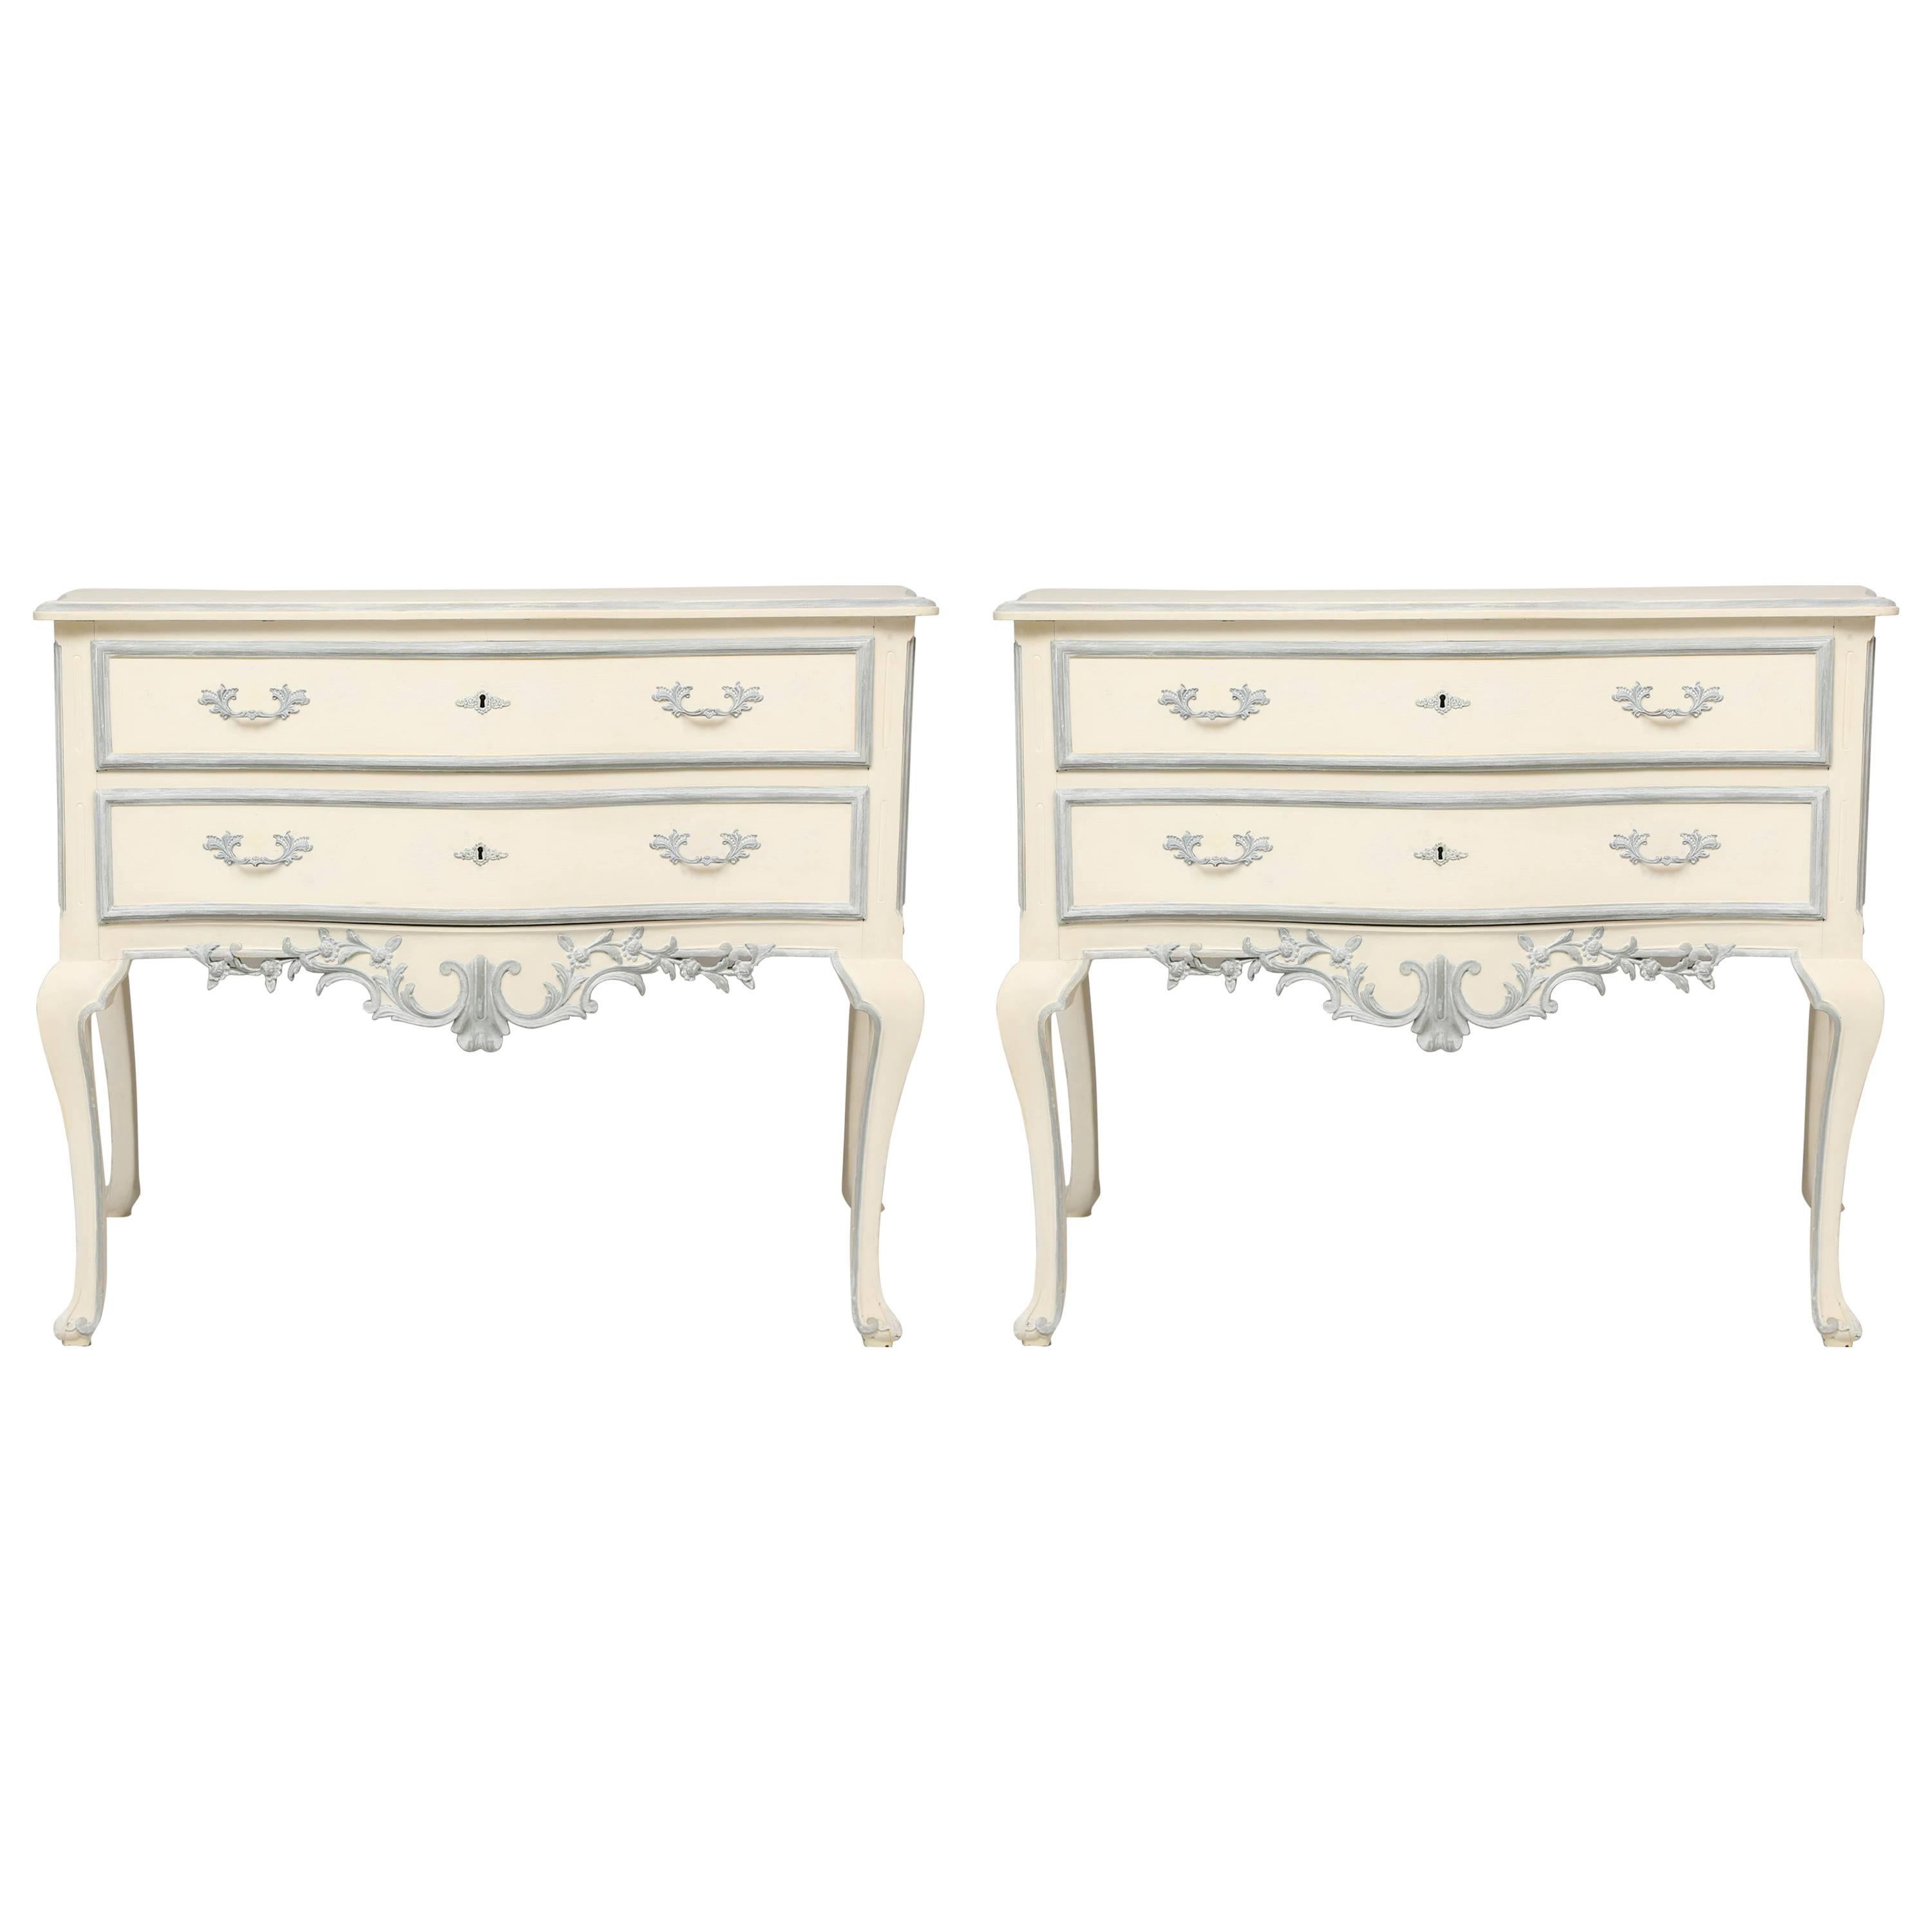 Pair of Painted 19th Century Commodes